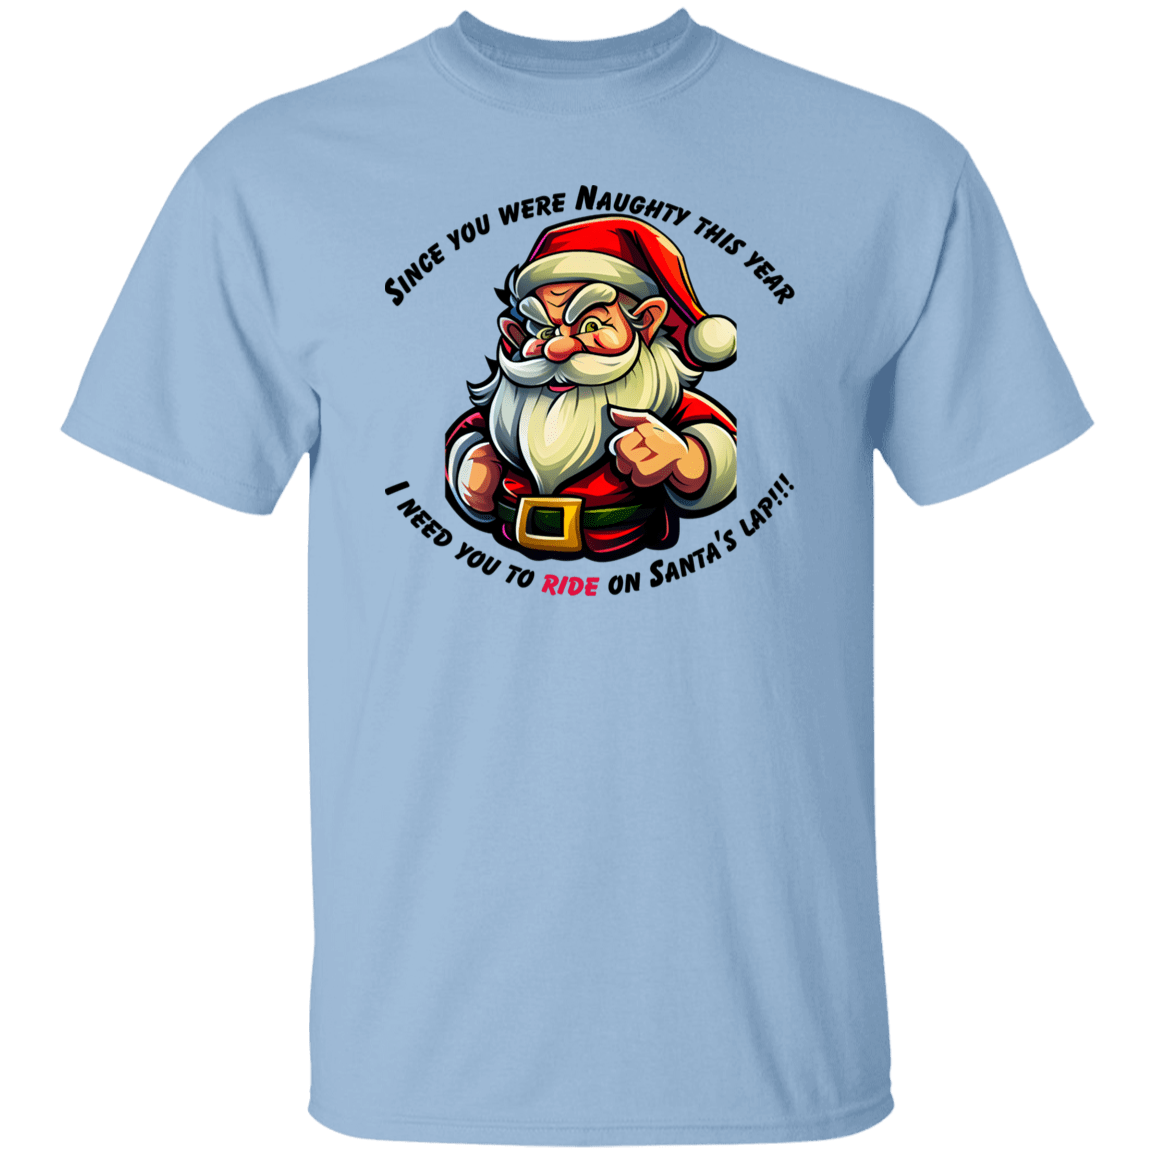 Since You've been Naughty T-Shirt